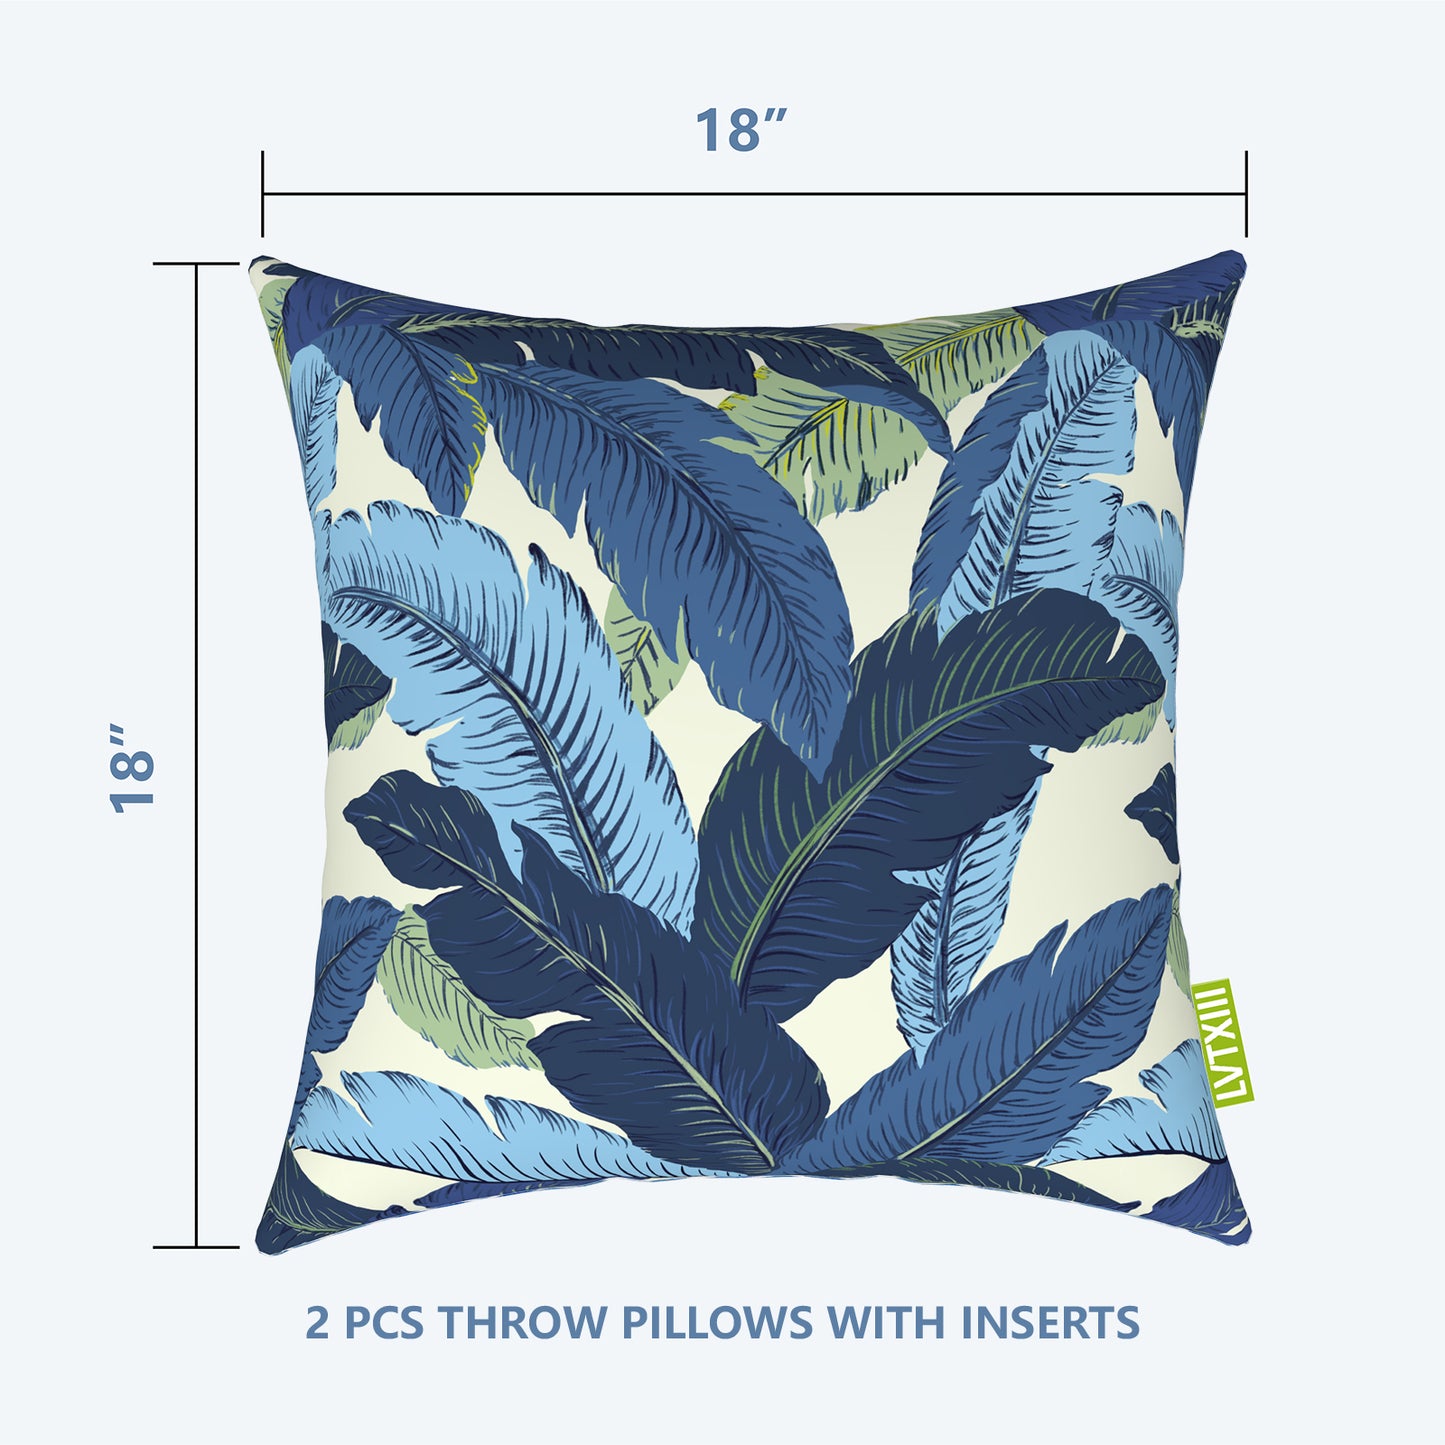 Melody Elephant Patio Throw Pillows with Inners, Fade Resistant Square Pillow Pack of 2, Decorative Garden Cushions for Home, 18x18 Inch, Swaying Palms Blue